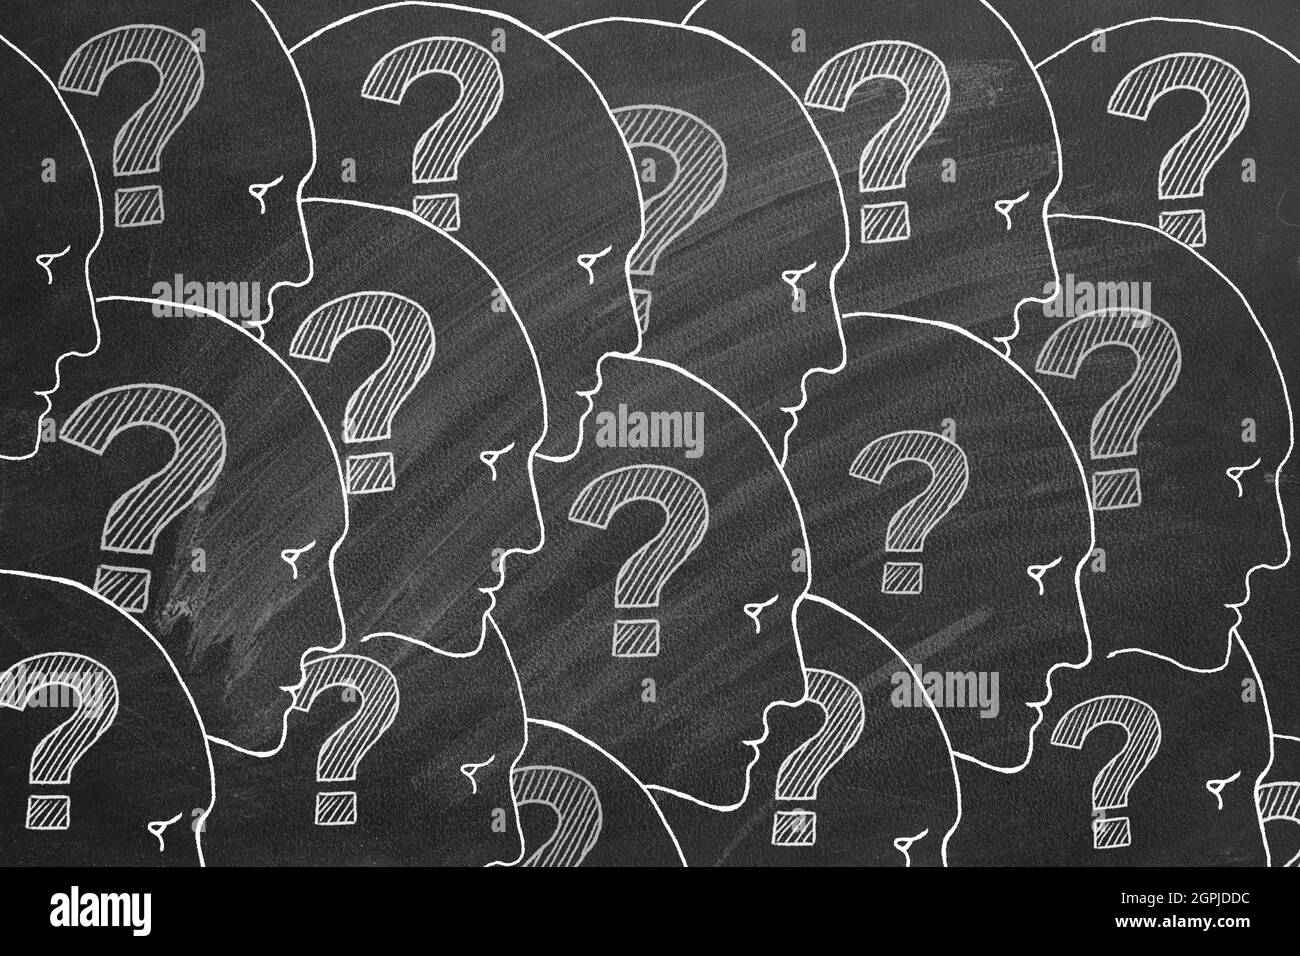 FAQ. Frequently Asked Questions. Conceptual illustration. Stock Photo